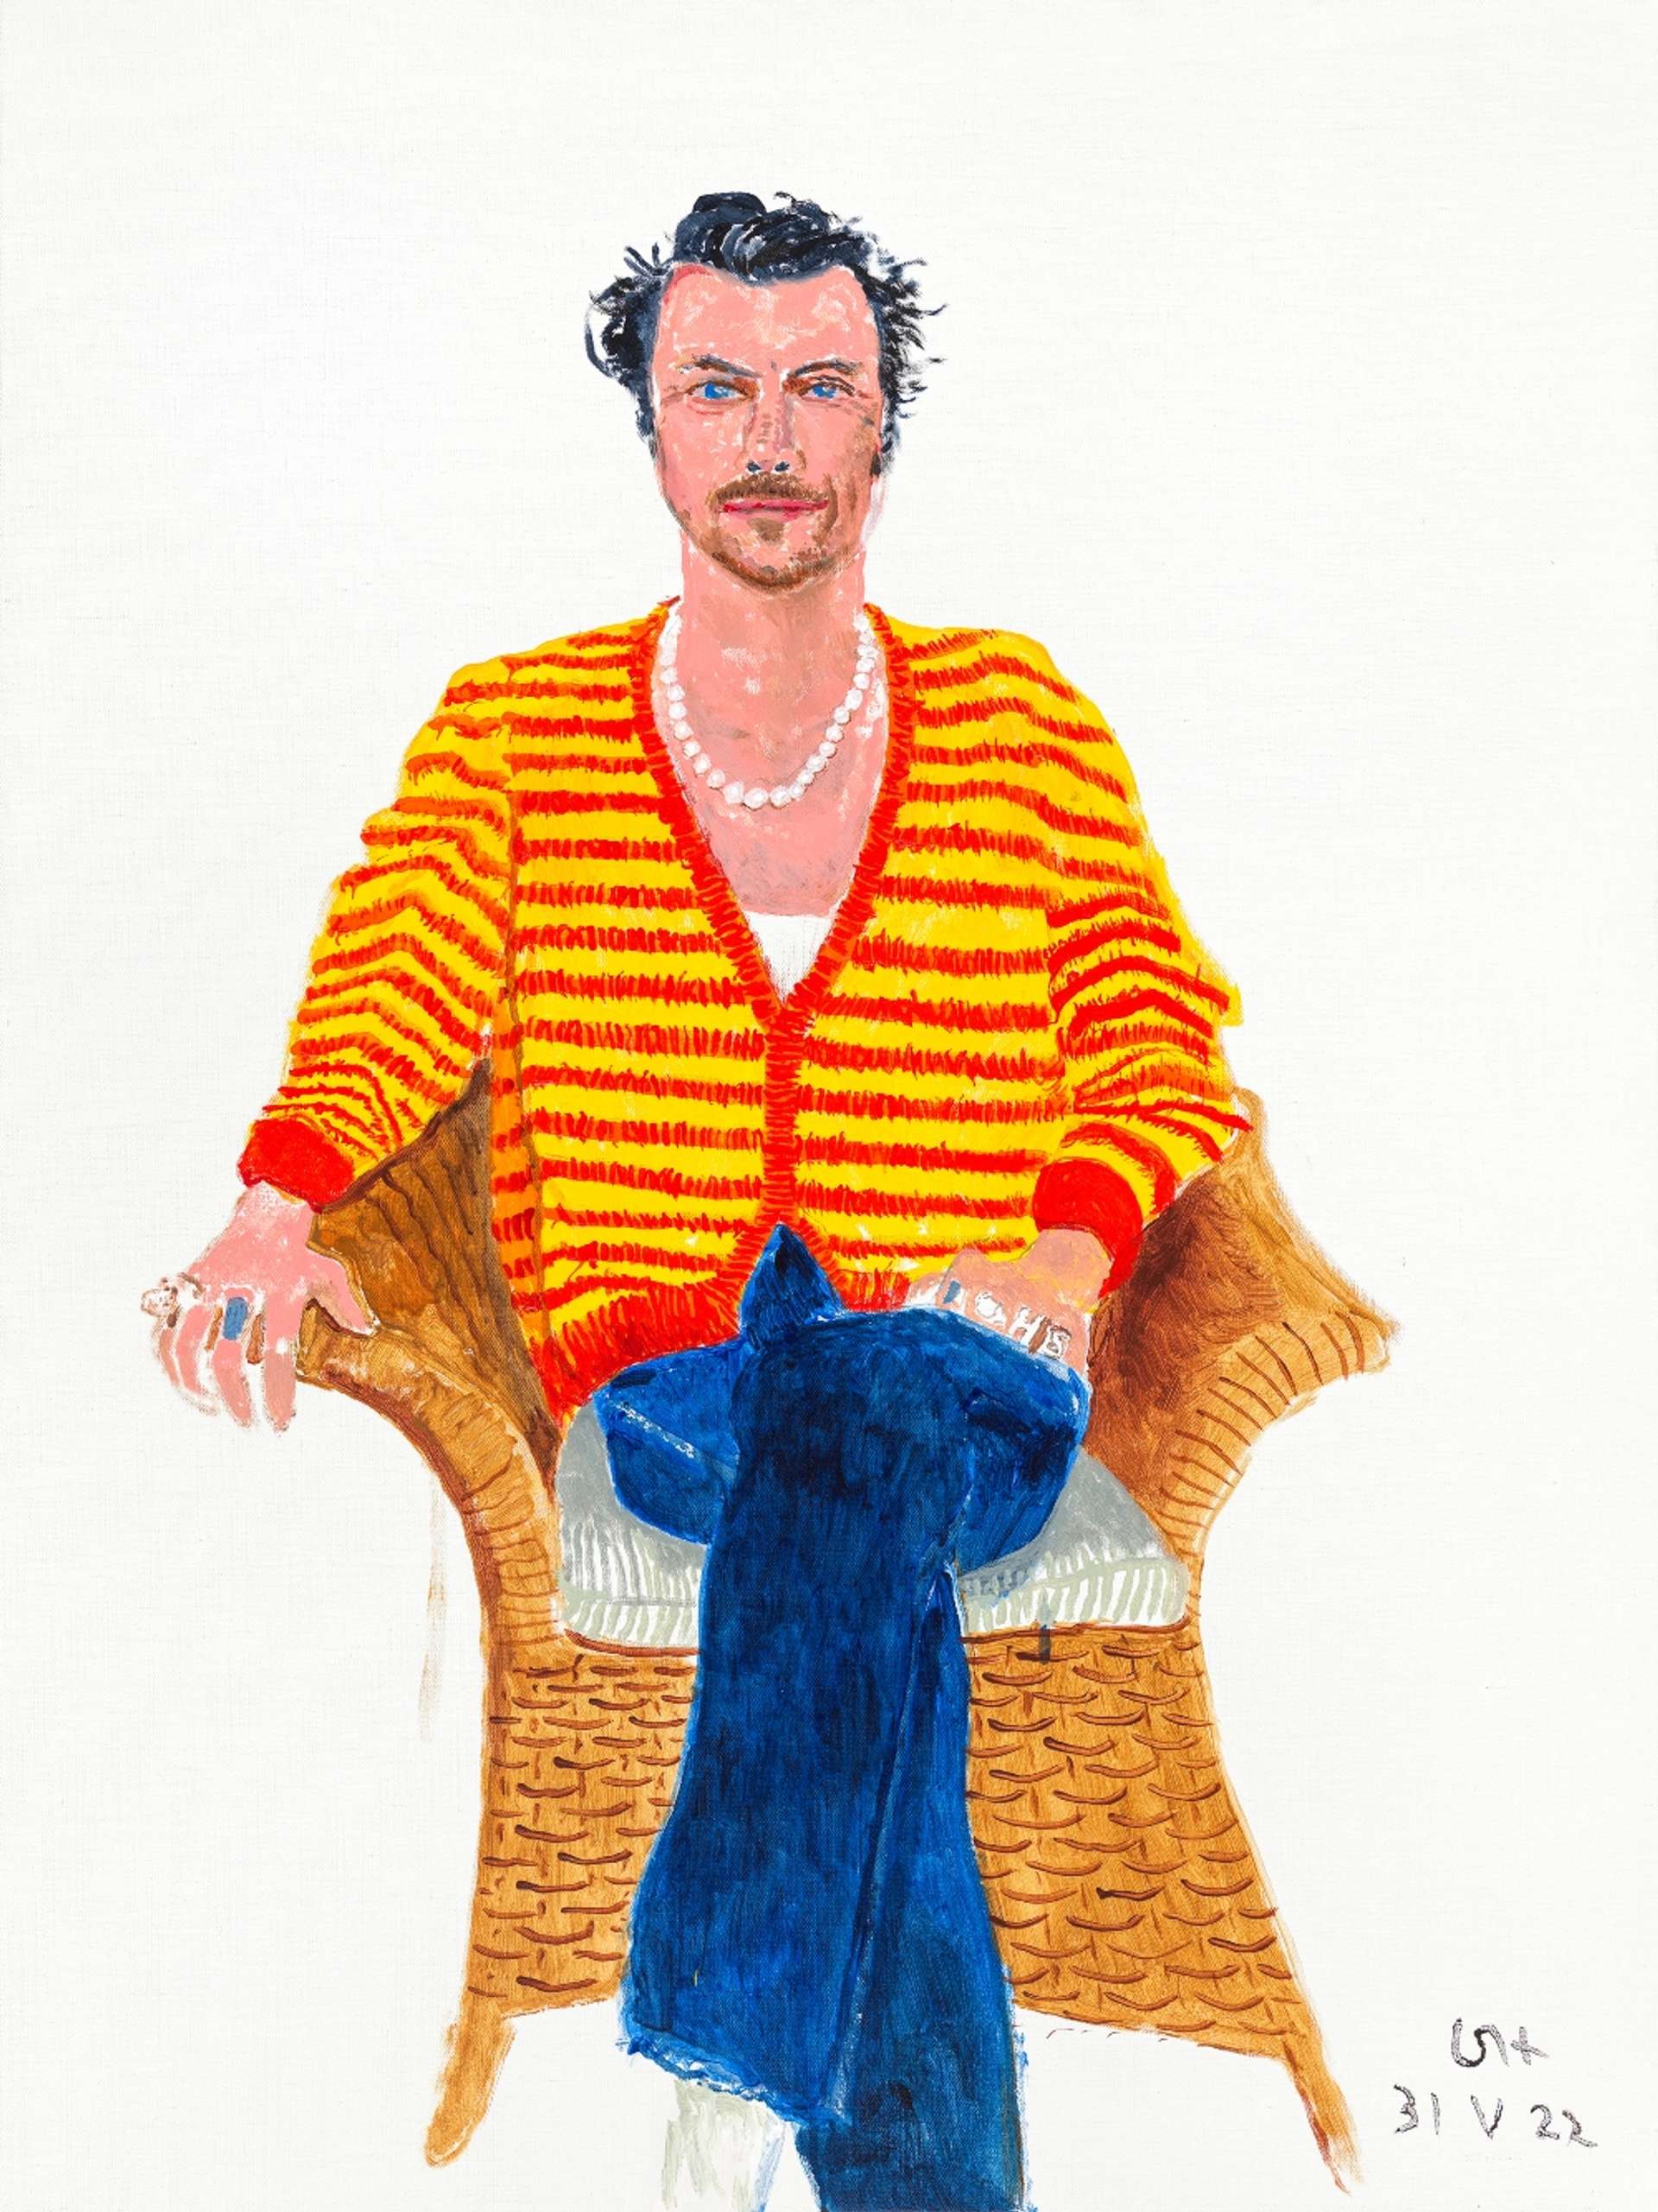 David Hockney’s Harry Styles, May 31st 2022. A portrait of Harry Styles, a man seated in a wicker chair wearing blue jeans, a yellow and red striped cardigan, a variety of rings and a pearl necklace. 